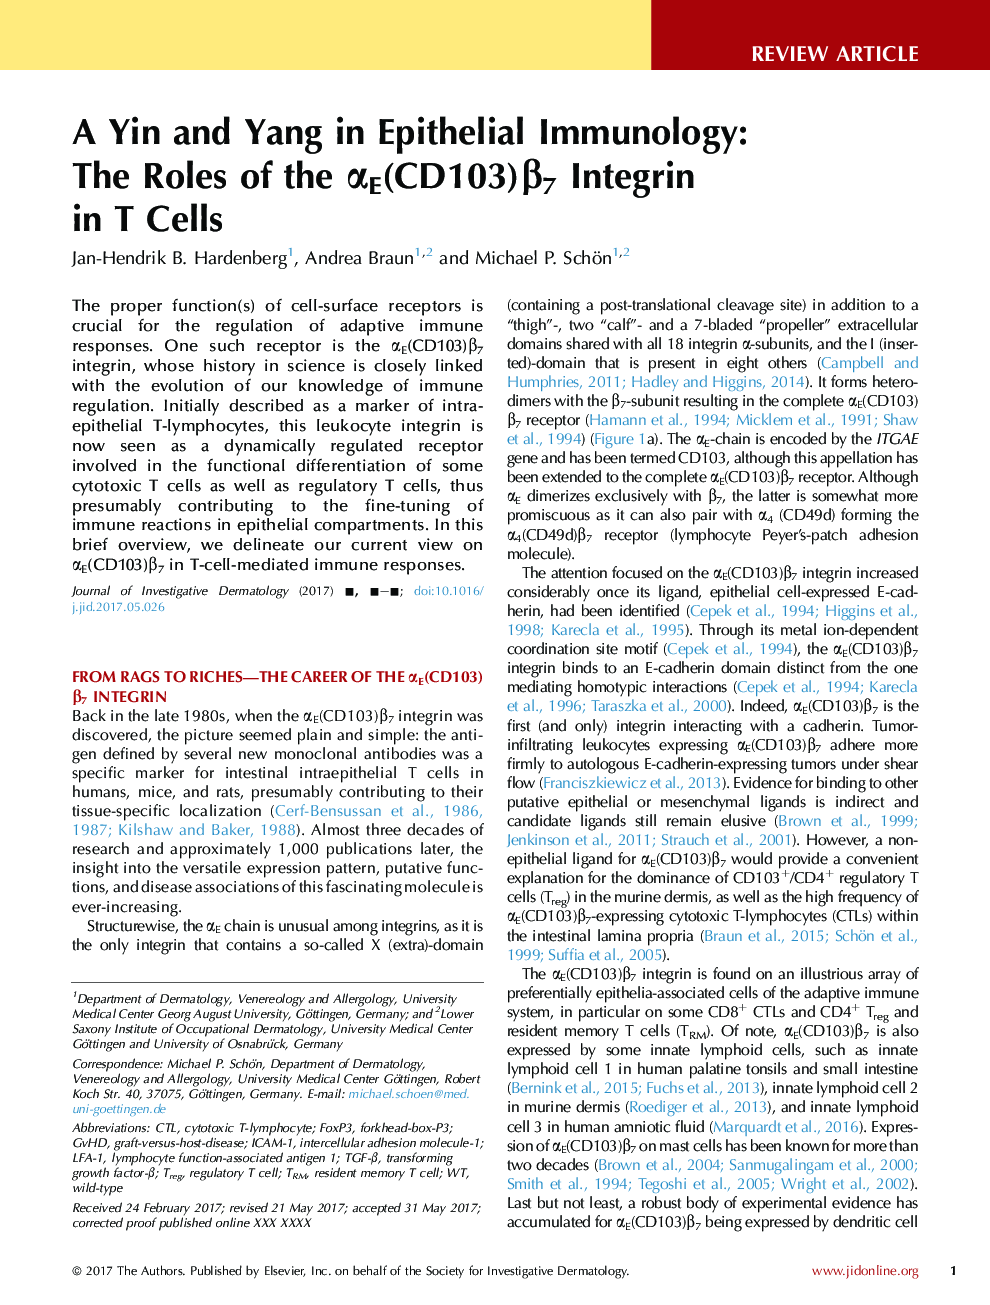 A Yin and Yang in Epithelial Immunology: The Roles of the Î±E(CD103)Î²7 Integrin inÂ TÂ Cells